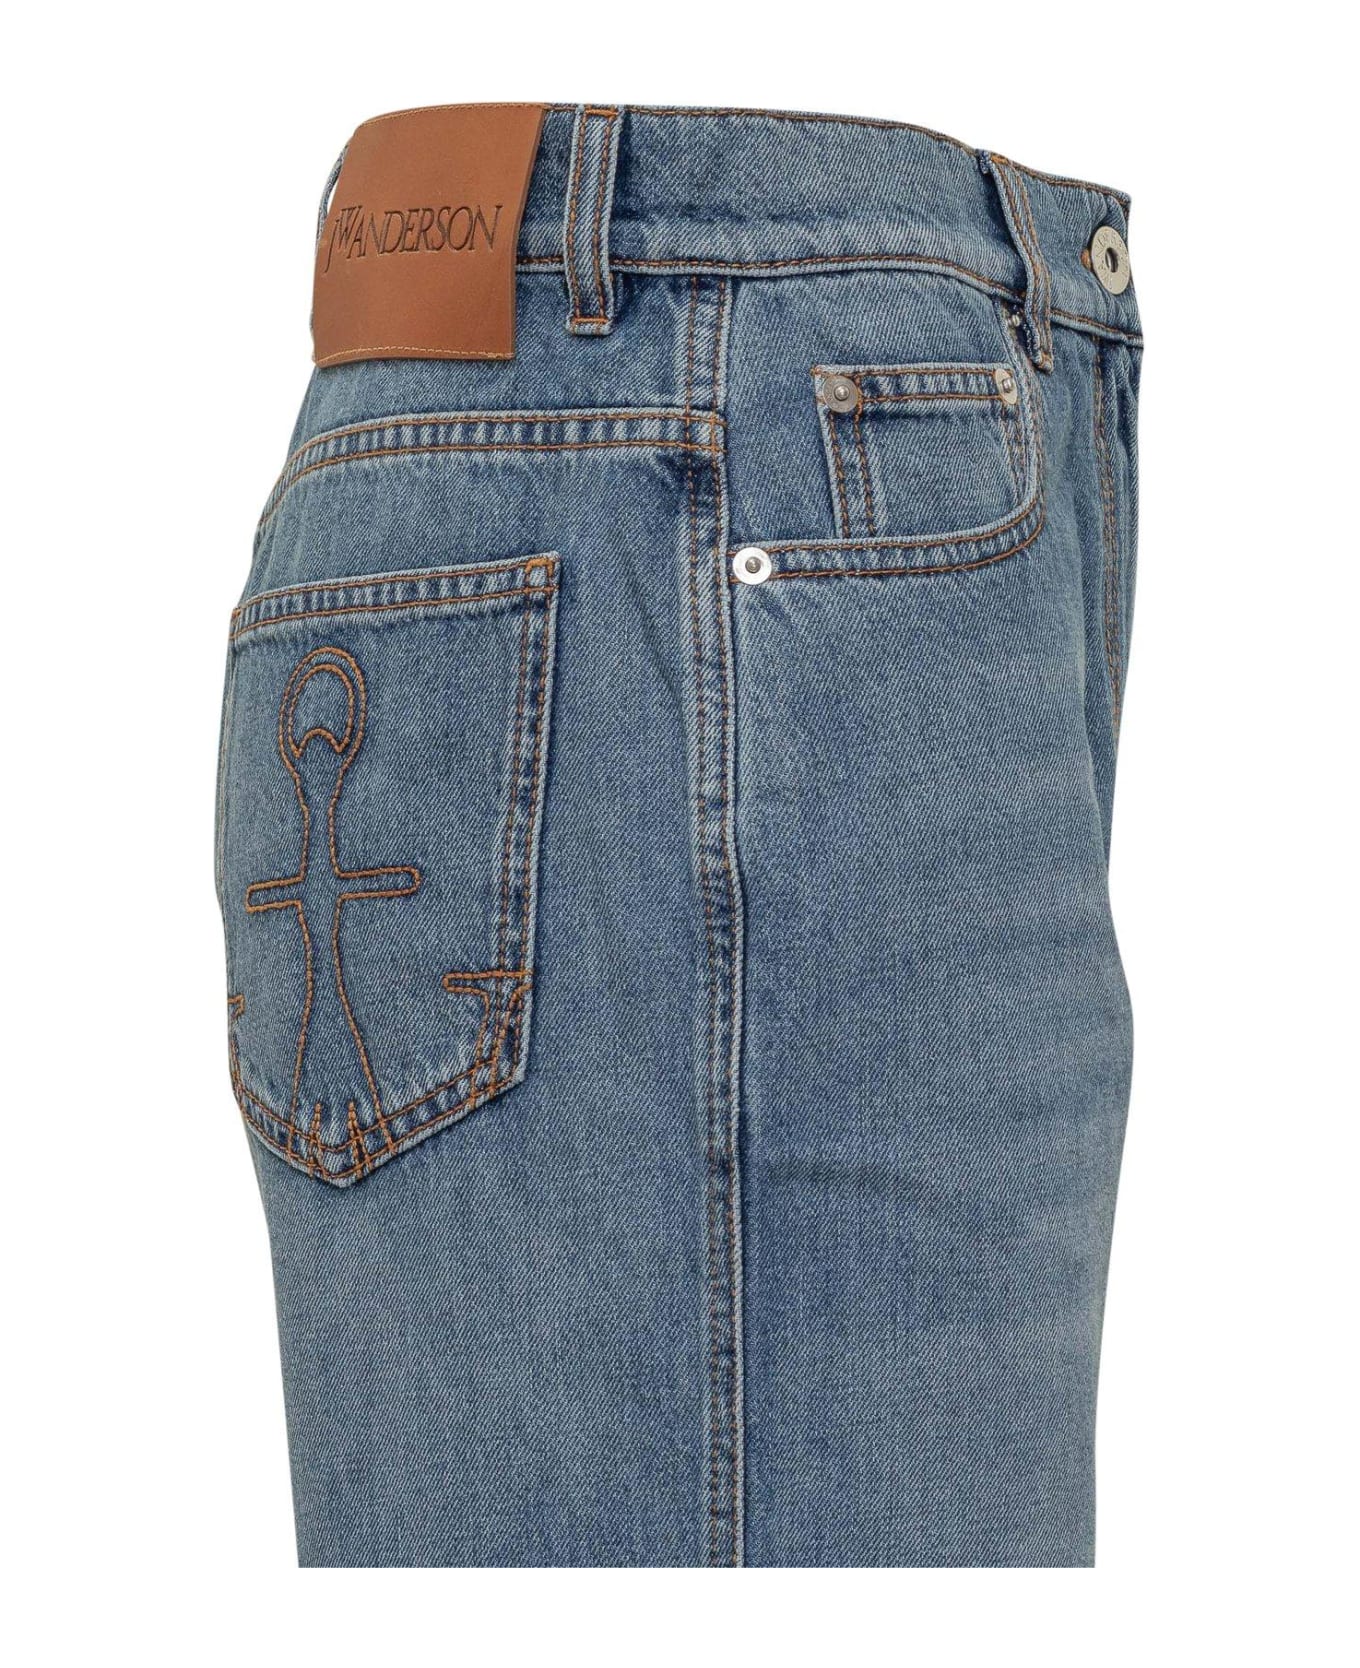 J.W. Anderson Cut-out Knee Bootcut Jeans - BLUE